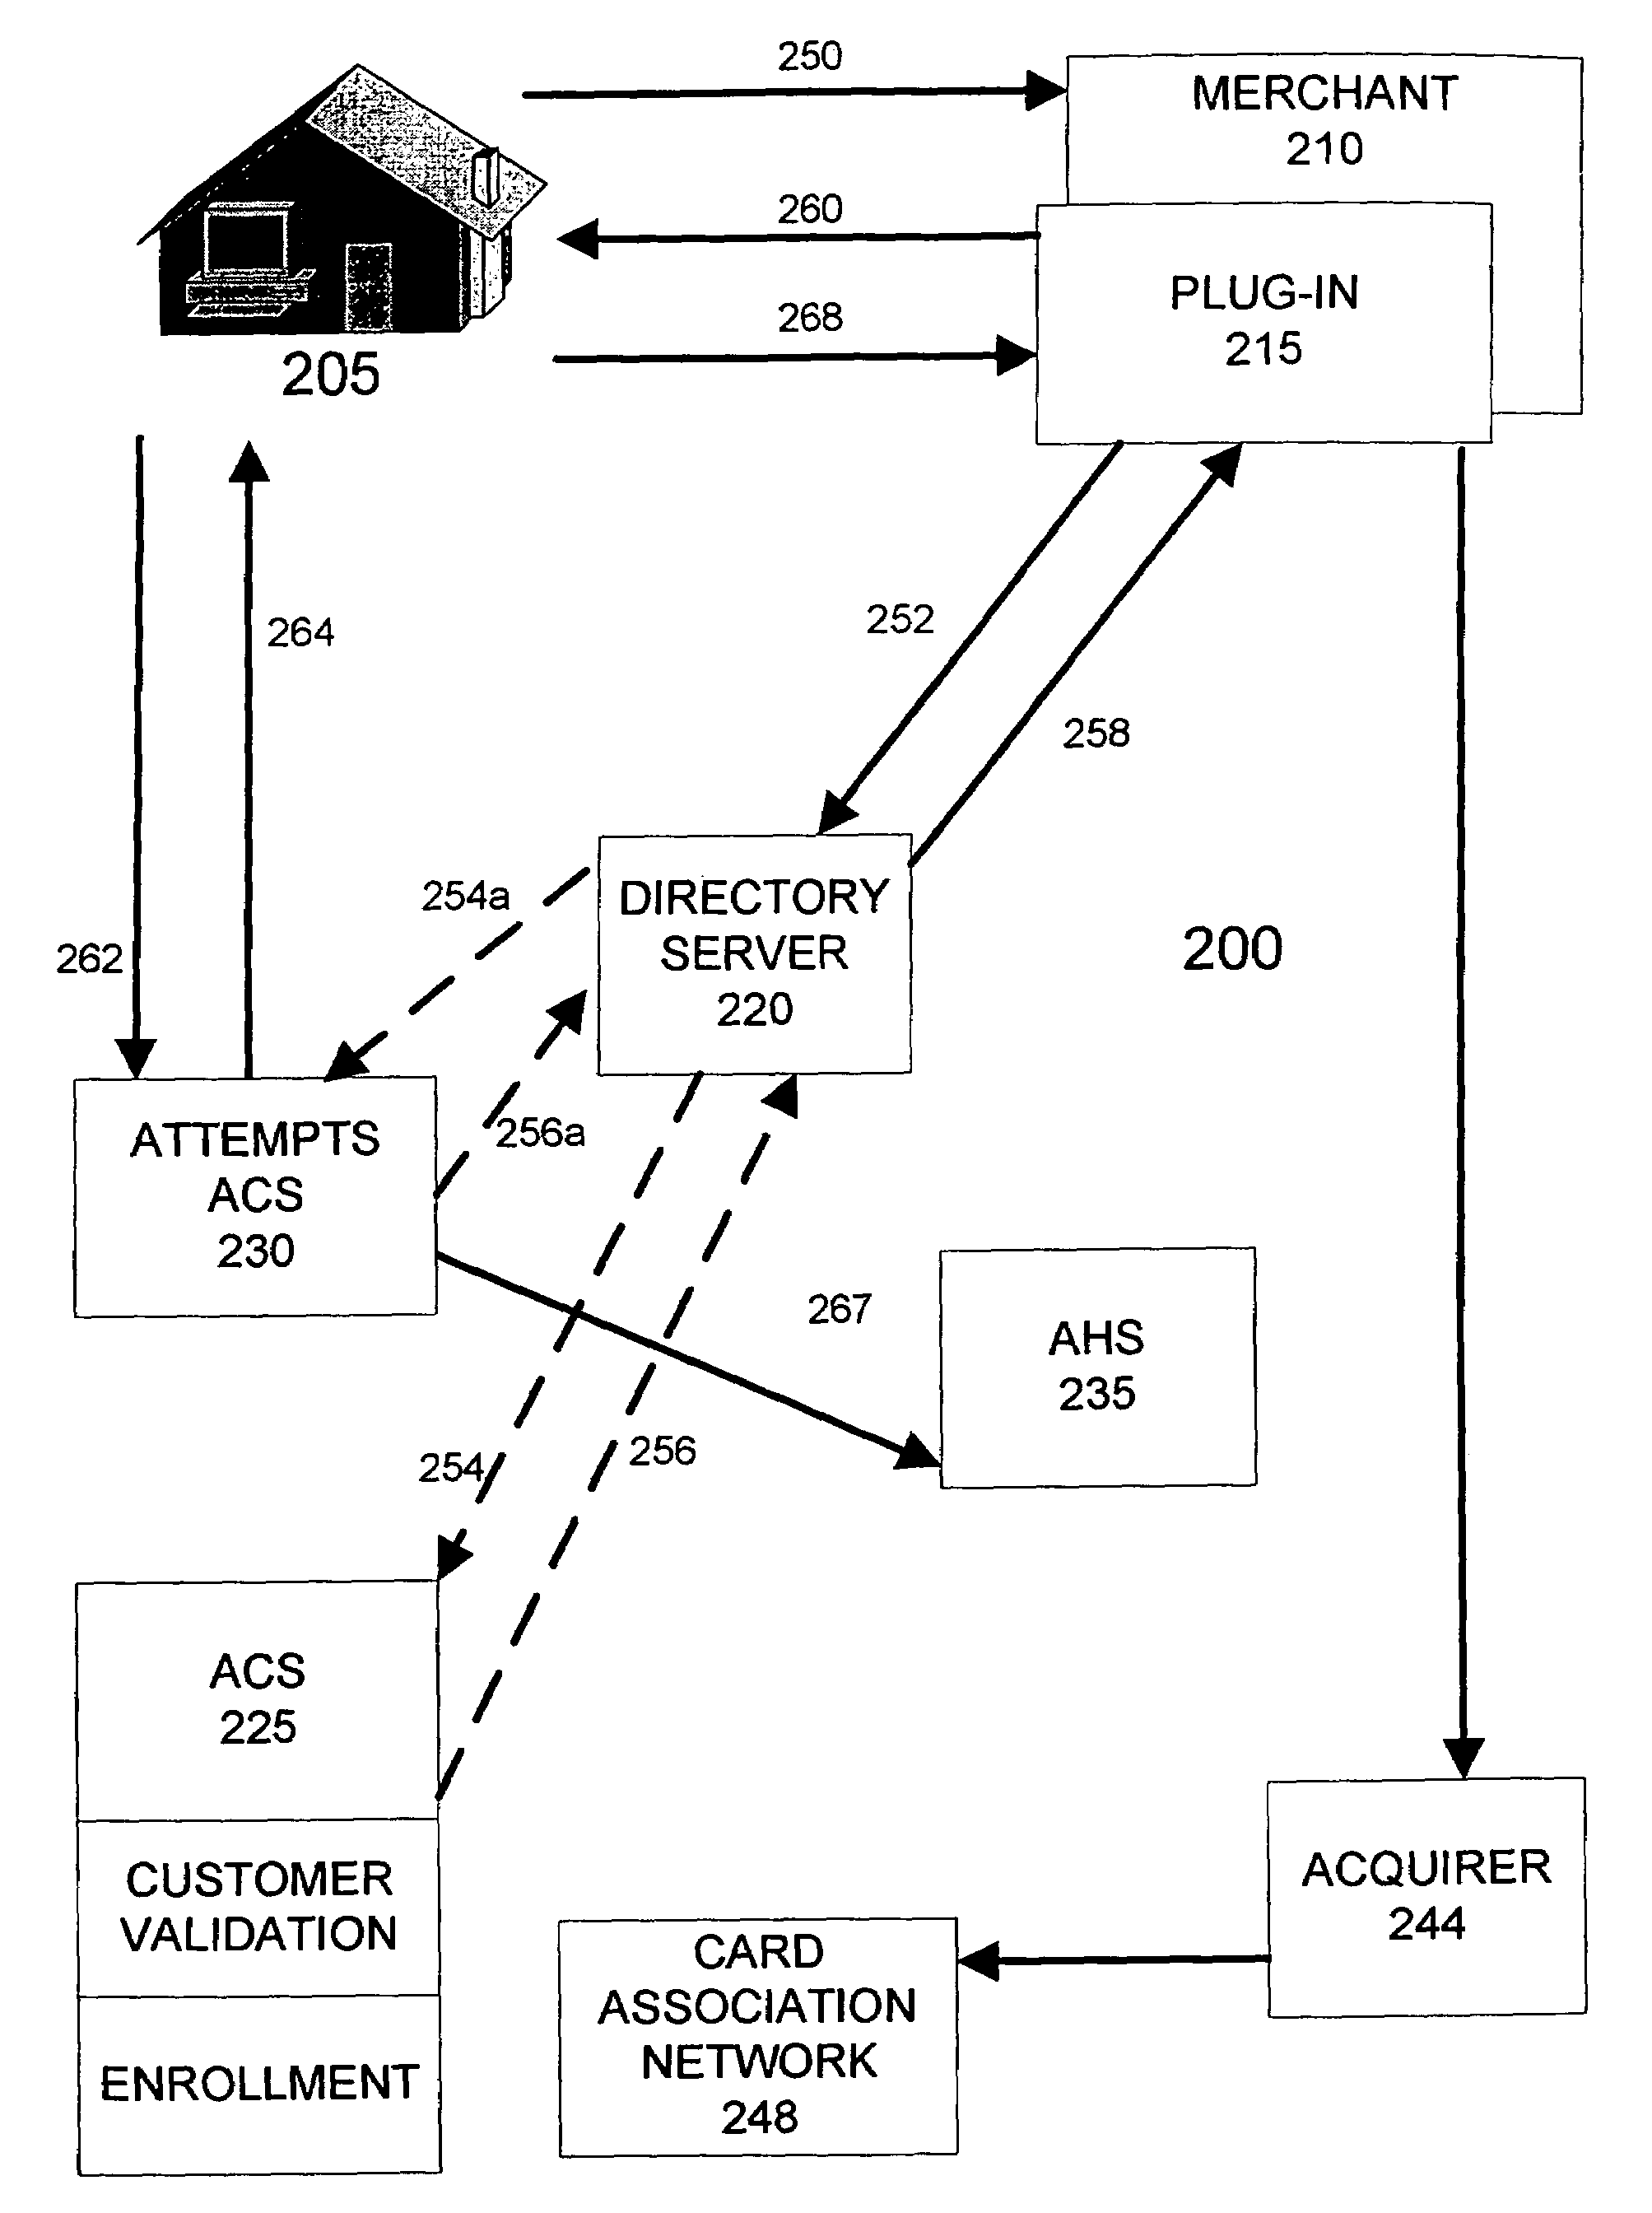 Managing attempts to initiate authentication of electronic commerce card transactions